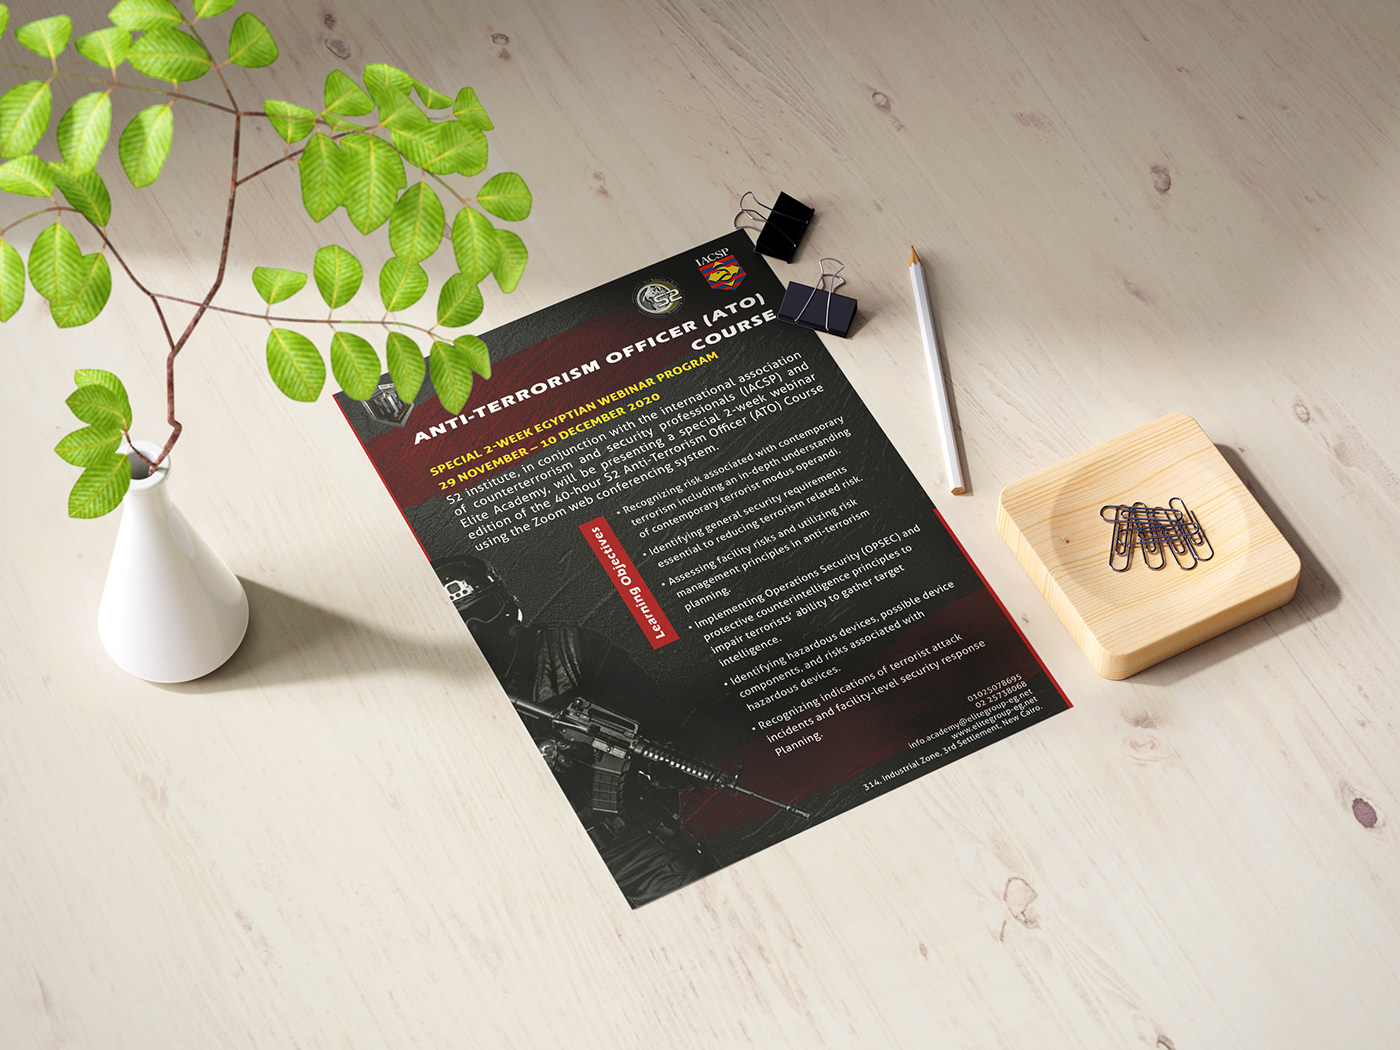 academy Anti-terrorism officer course educate flyer Mockup officer police Terrorism